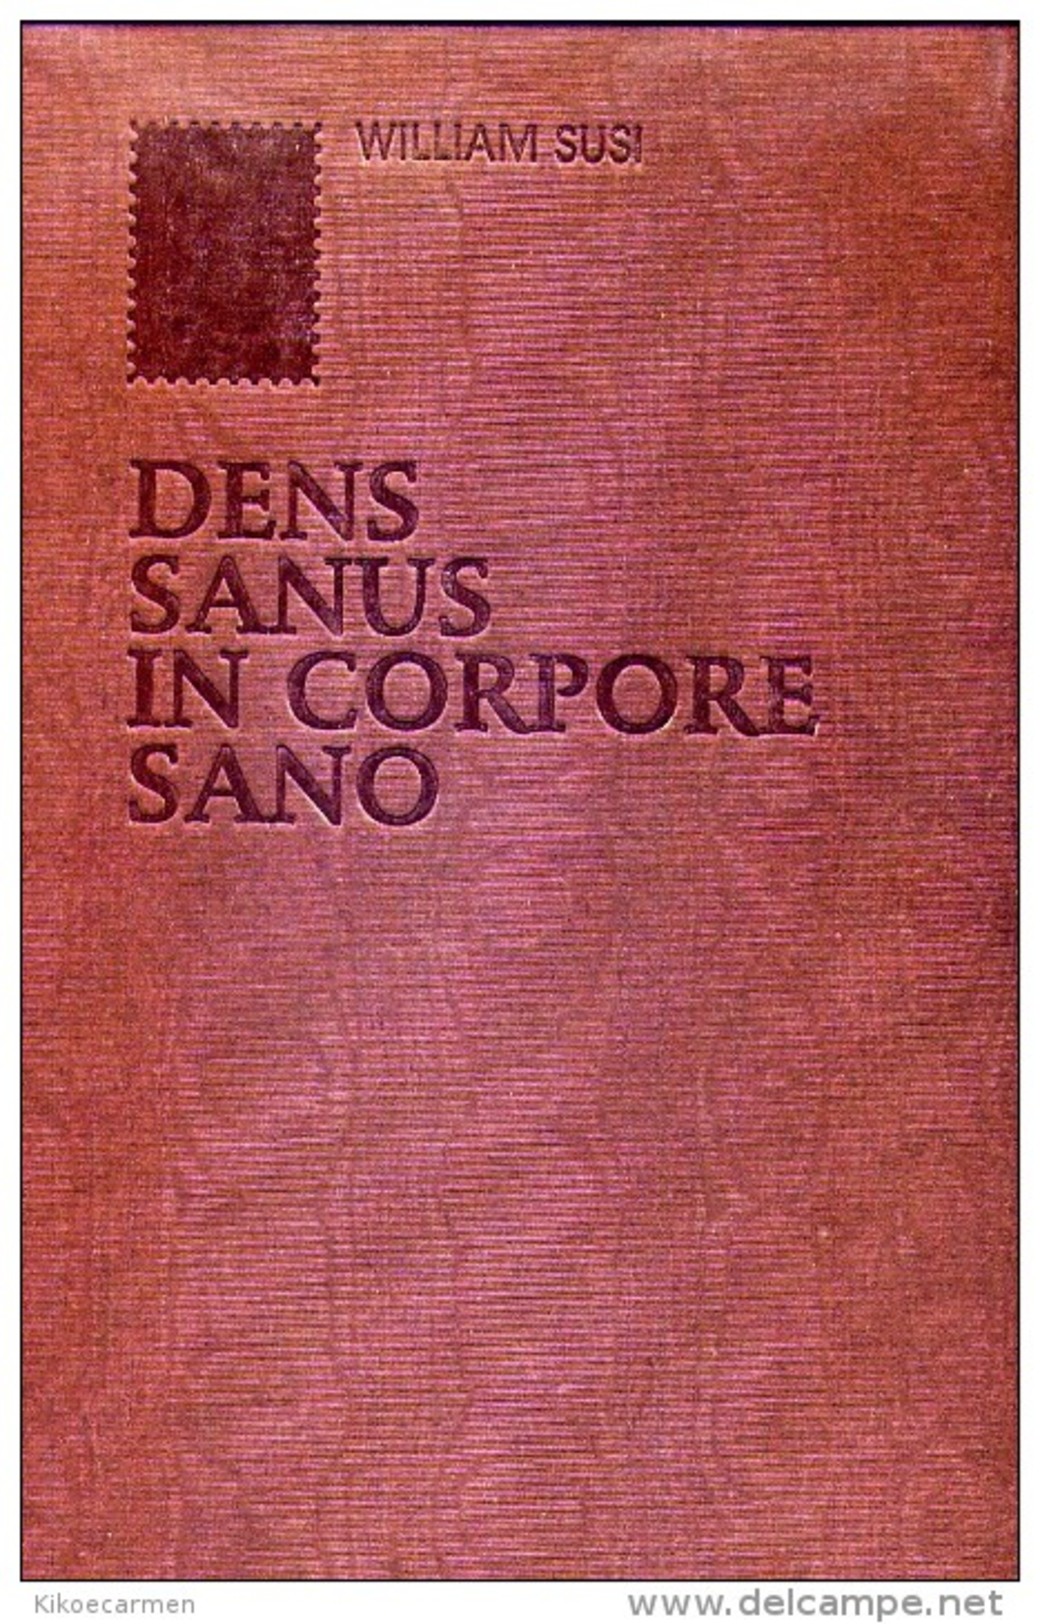 DENTISTRY IN STAMPS, DENS SANUS 192 Black And White Pages- Dental Dent Teeth Tooth Mouth Medicine Zahn Diente Dentale - Tematica